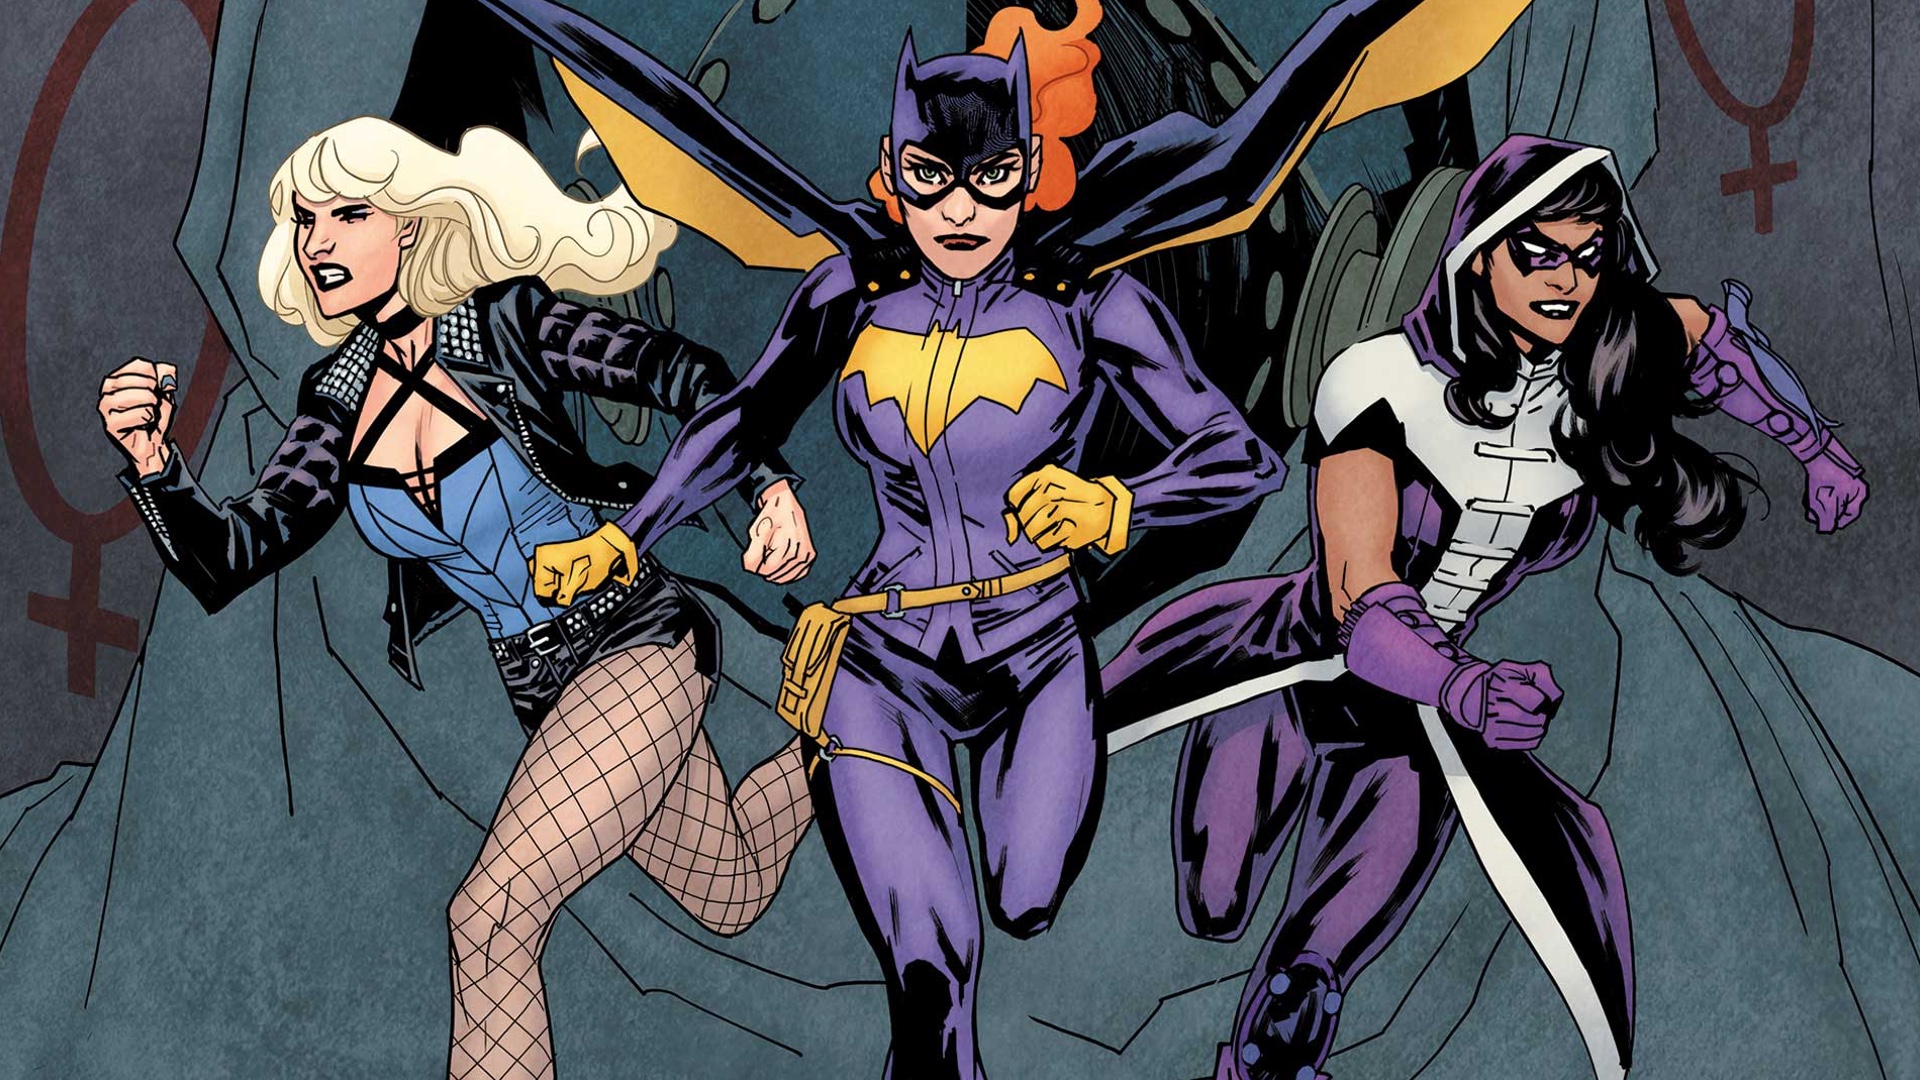 Details On Why Dc S Birds Of Prey Movie Pushed Sucide Squad Out